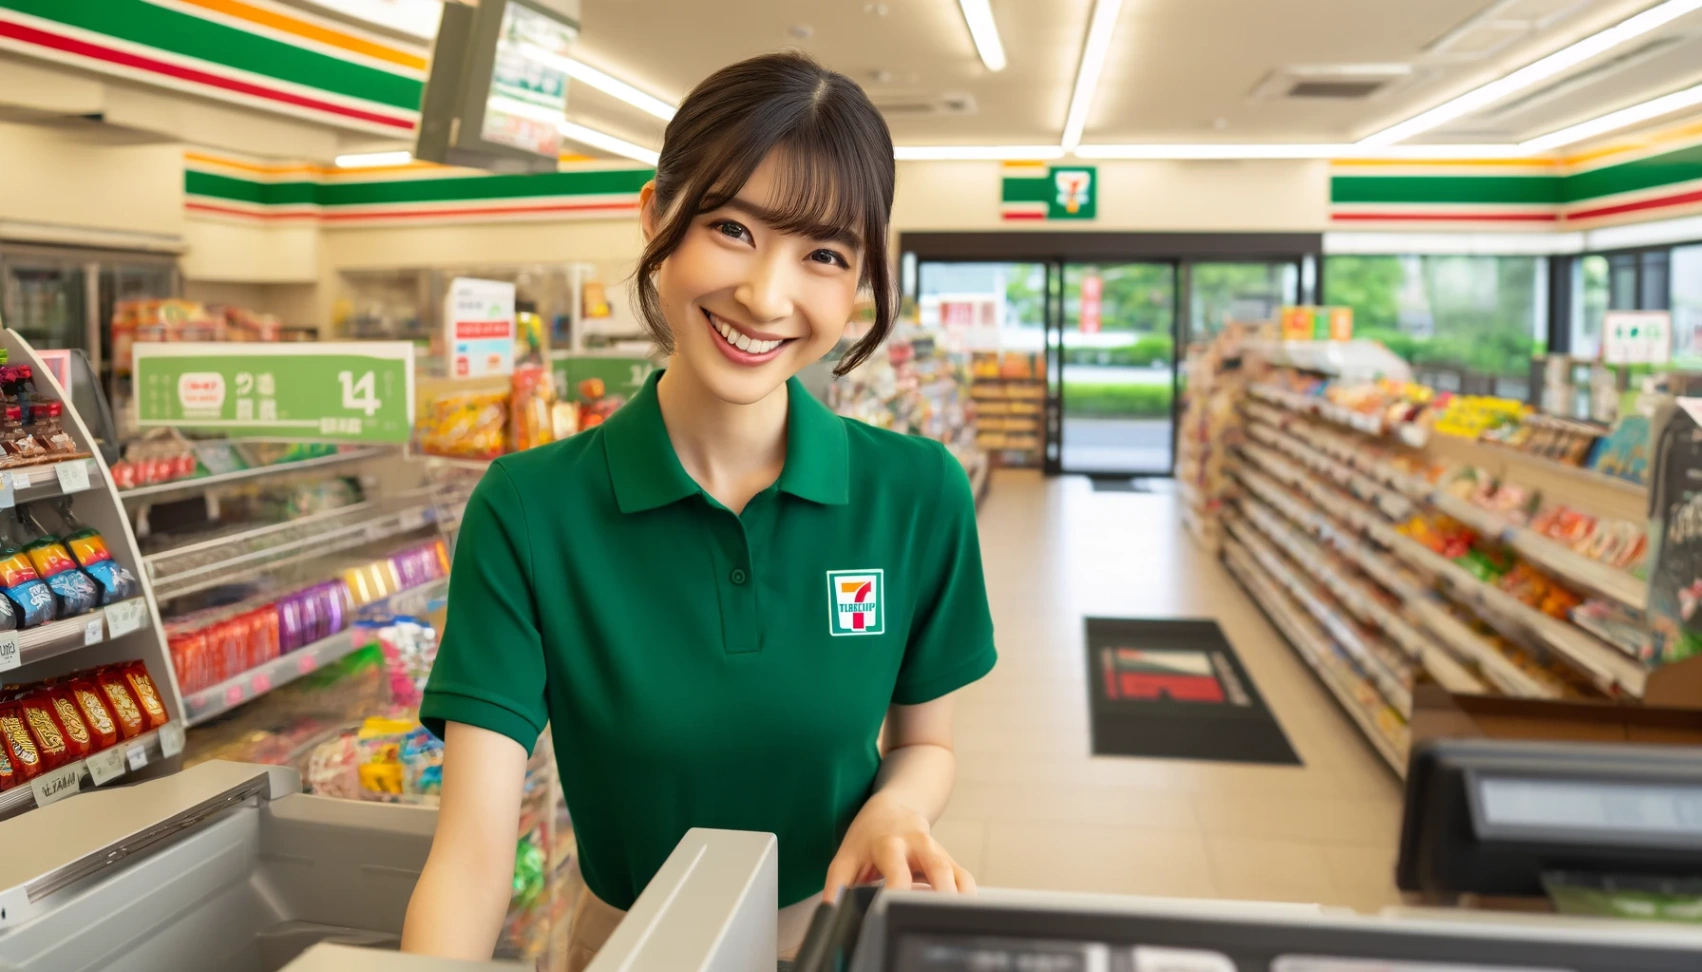 Find Out About Job Openings at 7-Eleven: Apply Online